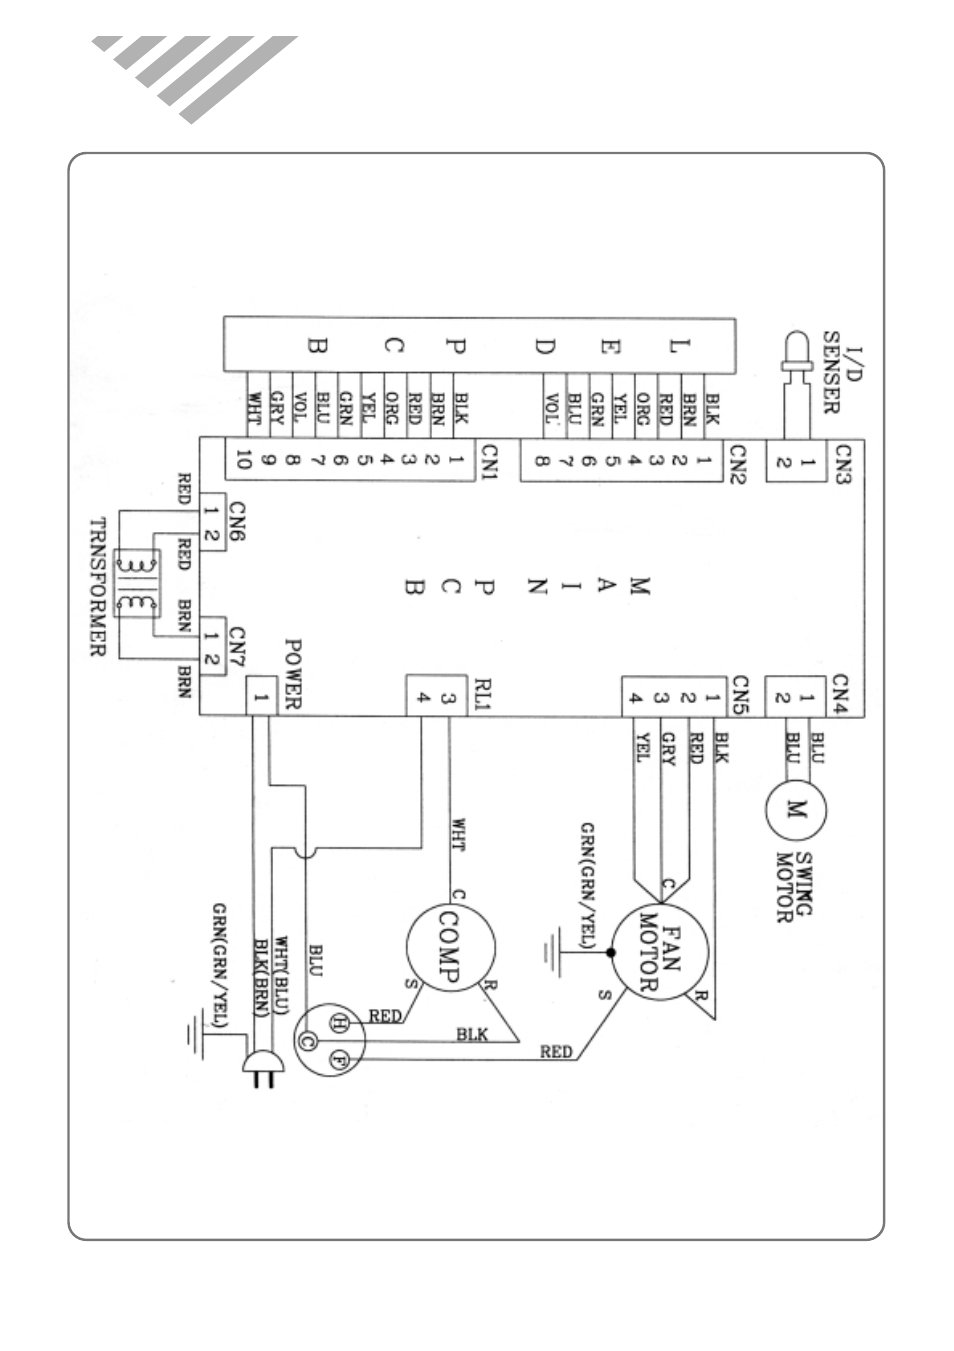 Wiring diagram | Daewoo ROOM AIR CONDITIONER DWC-121R User Manual | Page 13 / 41